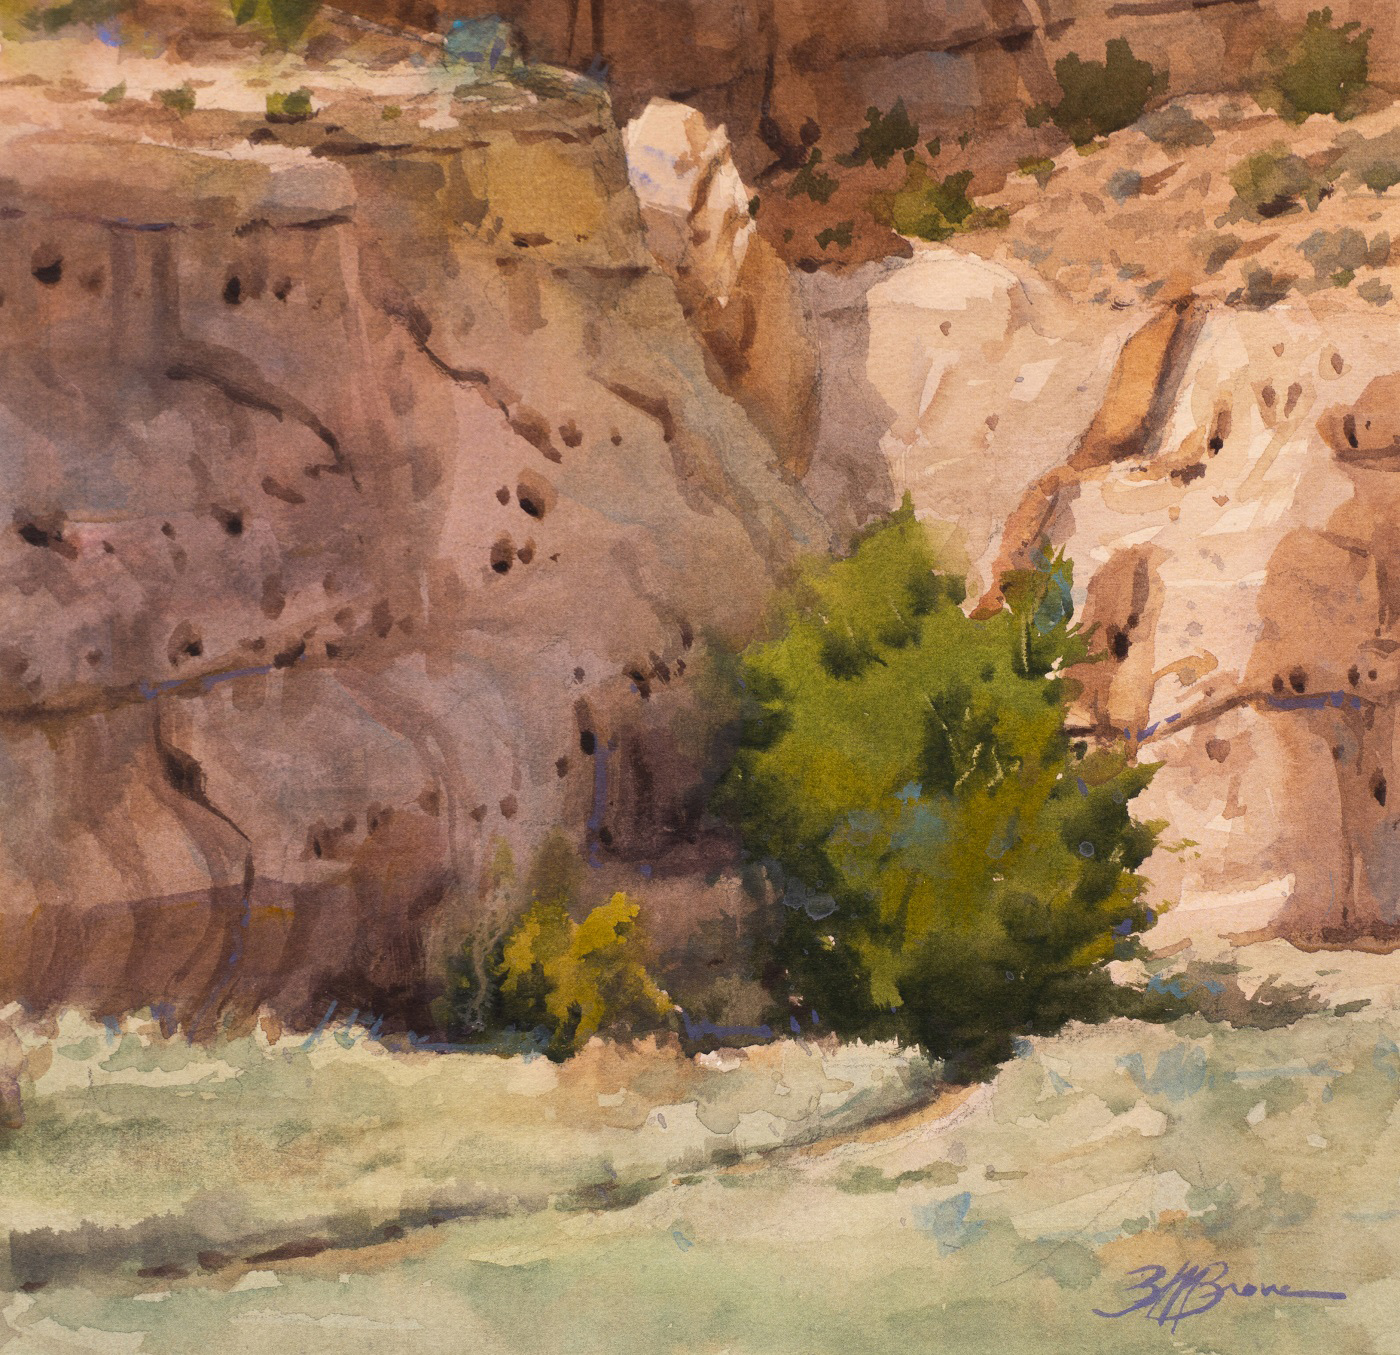 watercolor painting of head on view of mountains desert rocks with winding path leading into the tree in the center